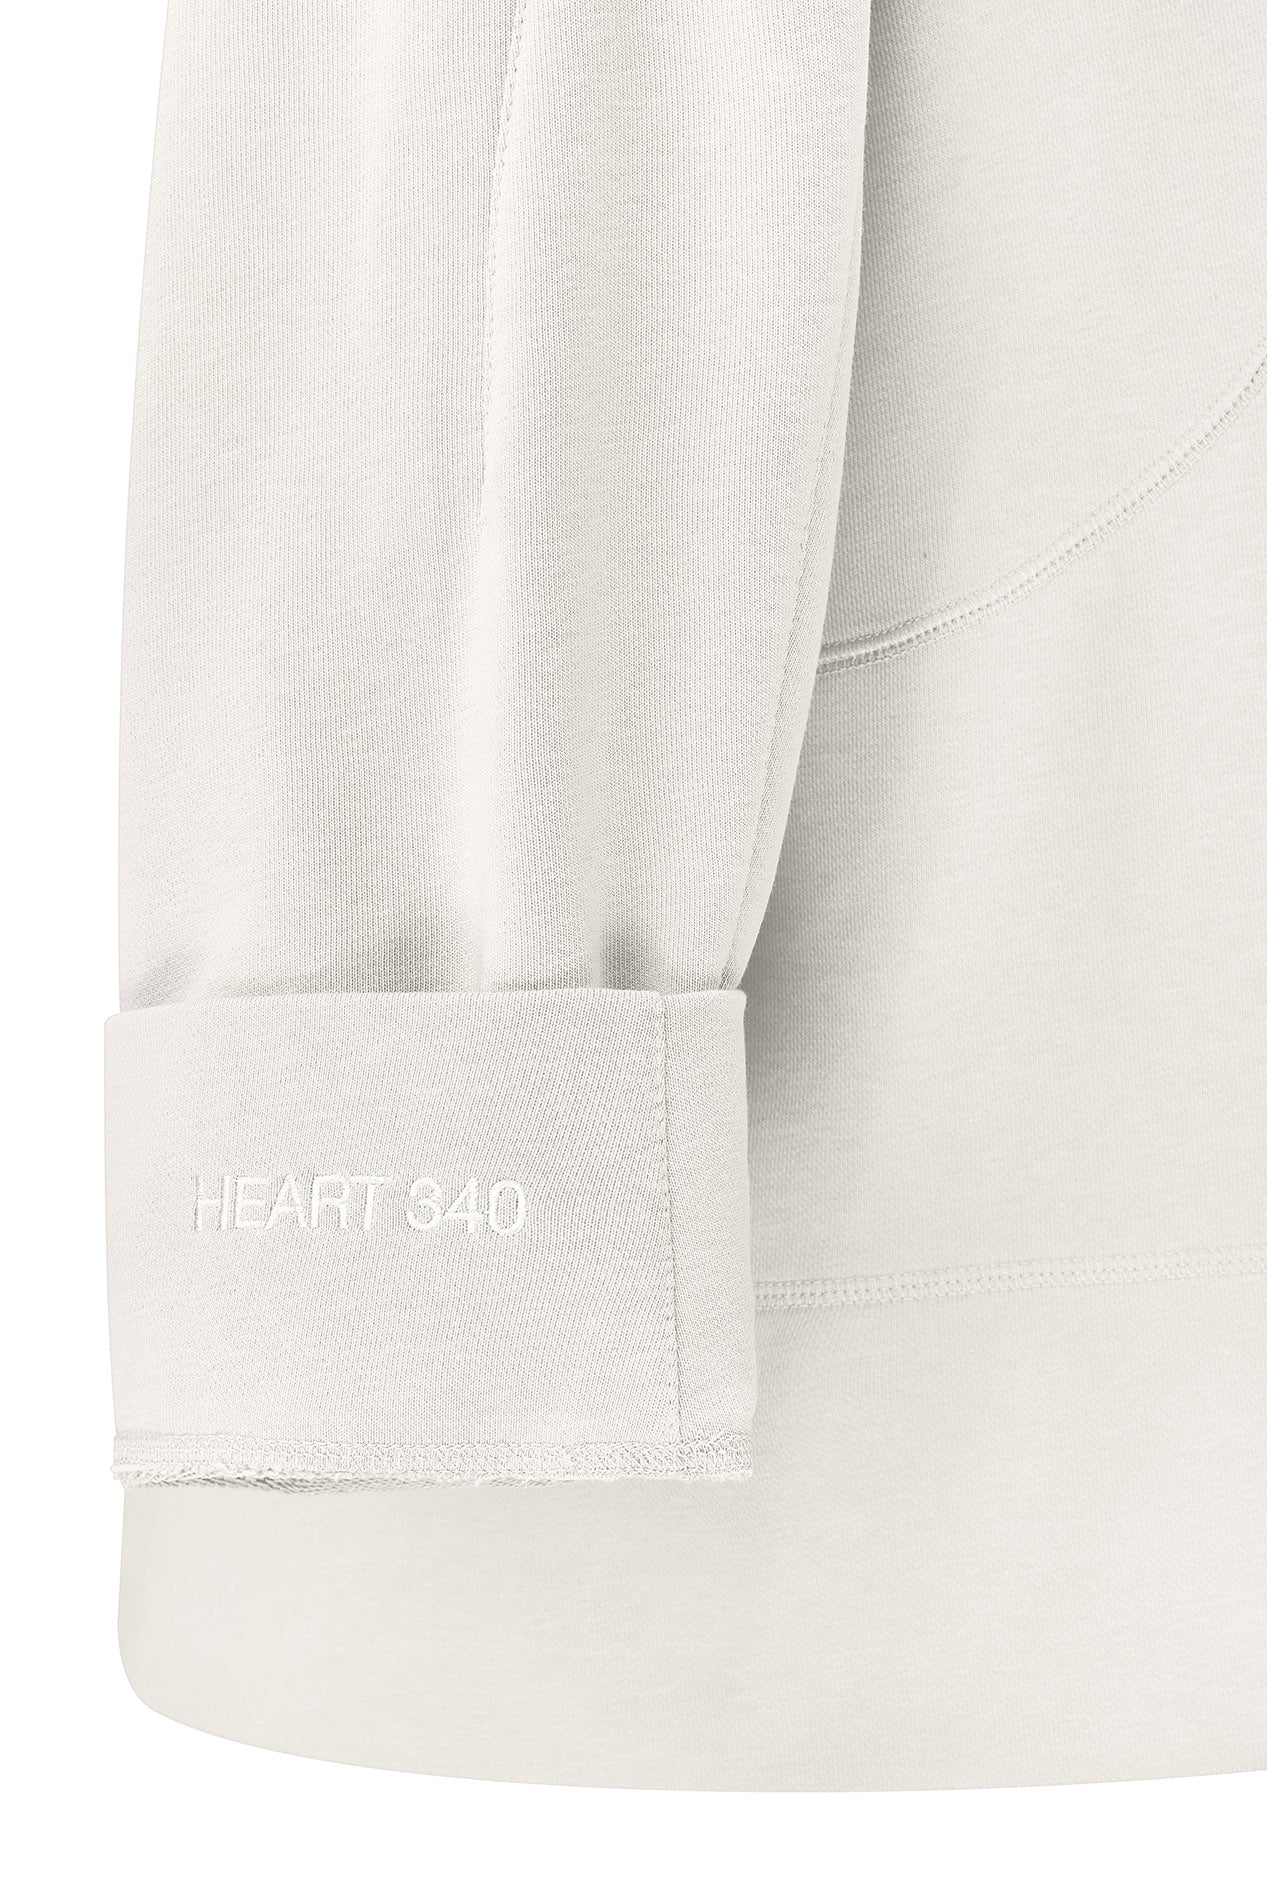 Hoodie with handmade heart embroidery (threads)